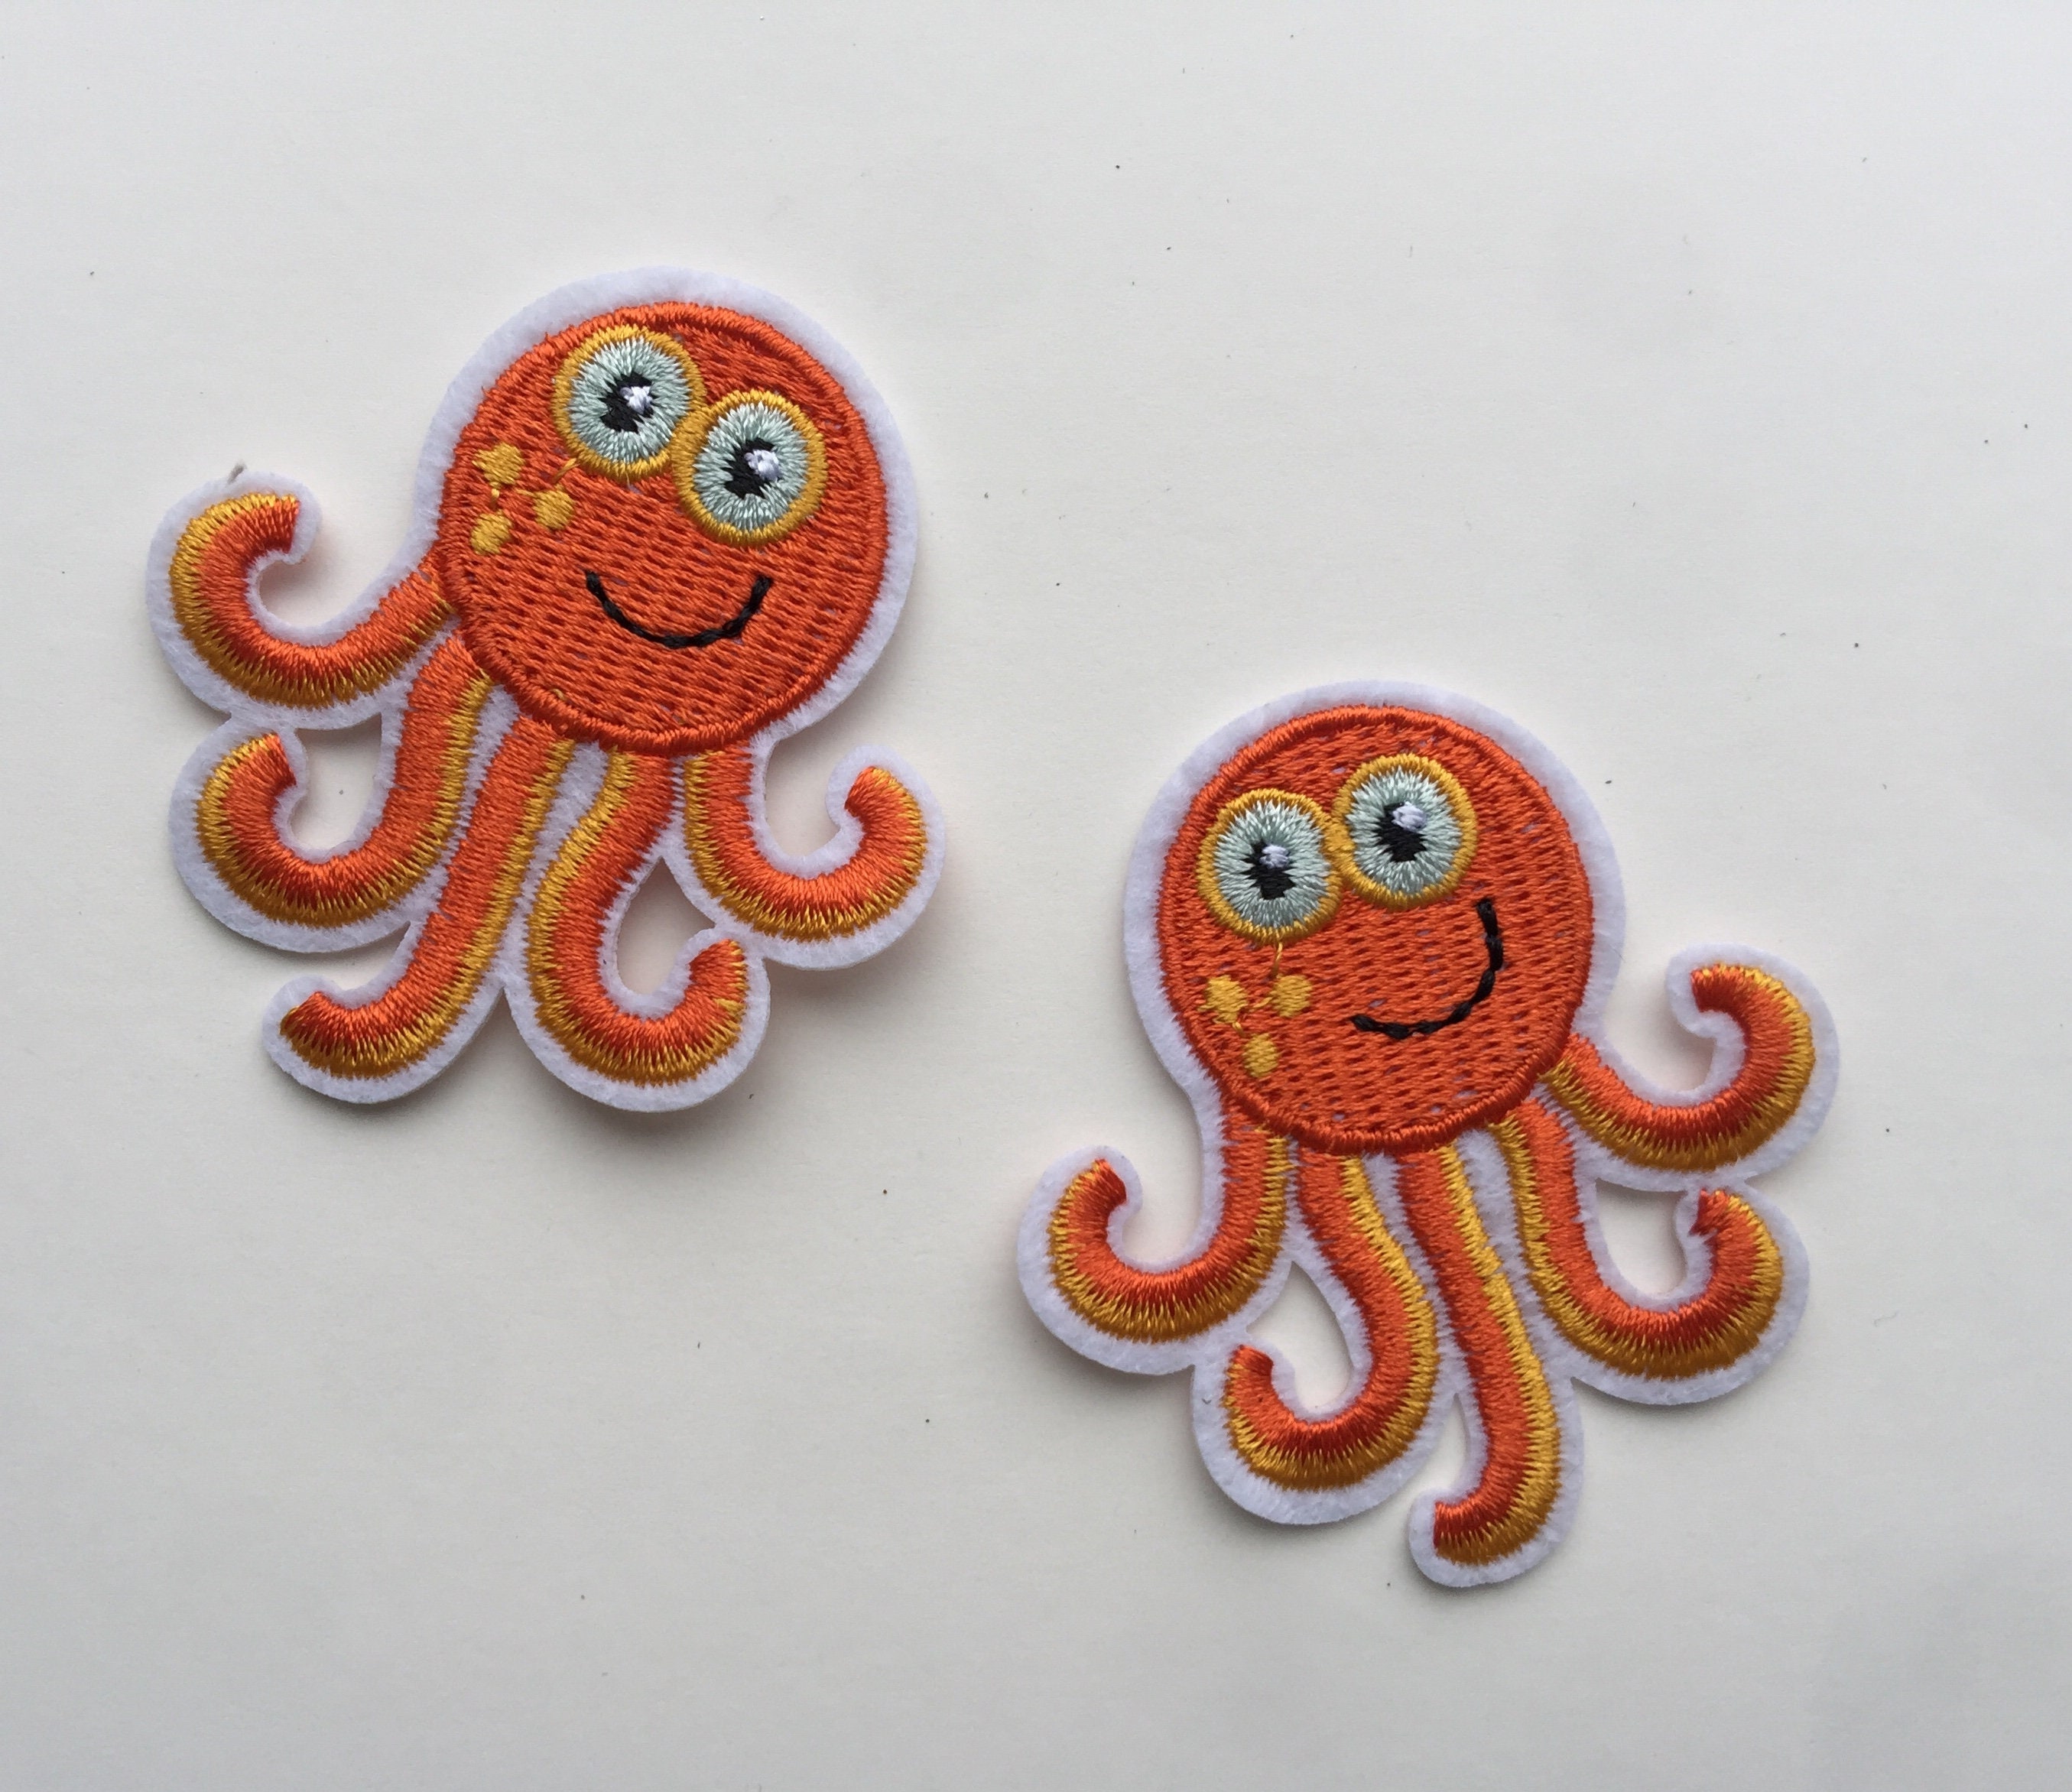 2 Octopus Iron-on Patches, Cute Octopuses to Iron On, Sea Creature